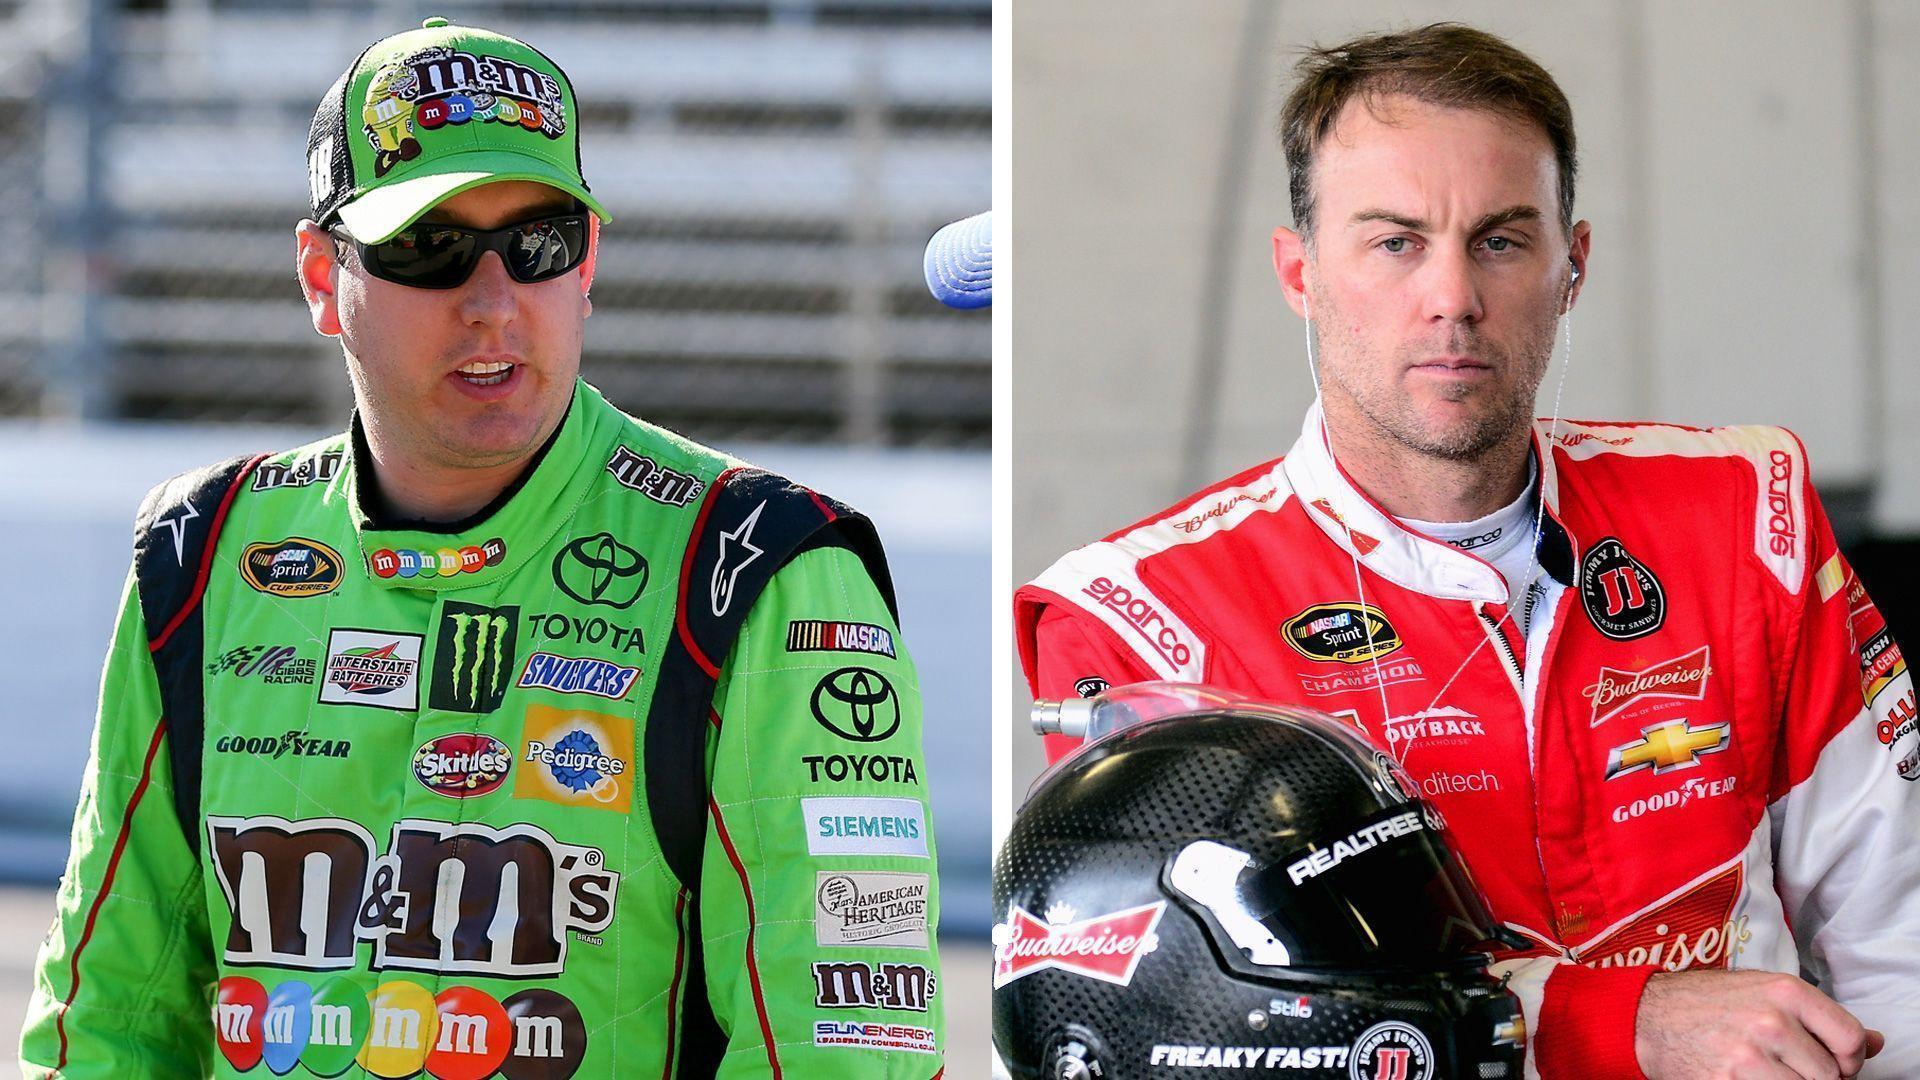 Harvick opens as 2016 Sprint Cup favorite, Kyle Busch co